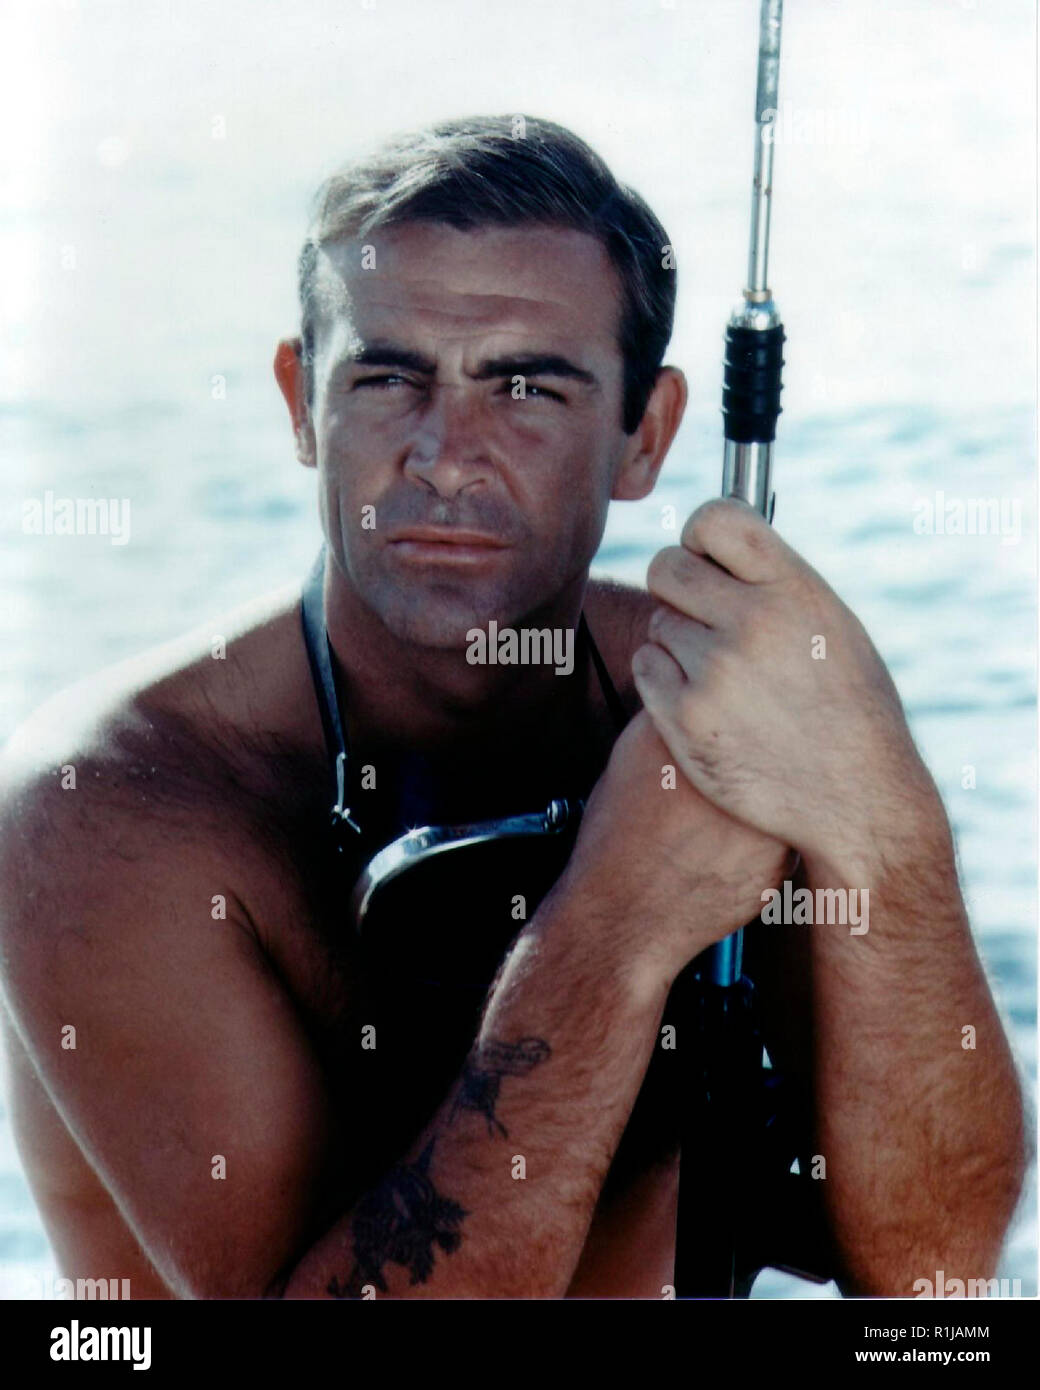 Thunderball is a 1965 British spy film and the fourth in the James Bond series produced by Eon Productions, starring Sean Connery as the fictional MI6 agent James Bond. It is an adaptation of the novel of the same name by Ian Fleming, which in turn was based on an original screenplay by Jack Whittingham. It was directed by Terence Young, with its screenplay by Richard Maibaum and John Hopkins. The movie would have been the first of the Bond series if not for legal disputes over copyright issues. Credit: Hollywood Photo Archive / MediaPunch Stock Photo